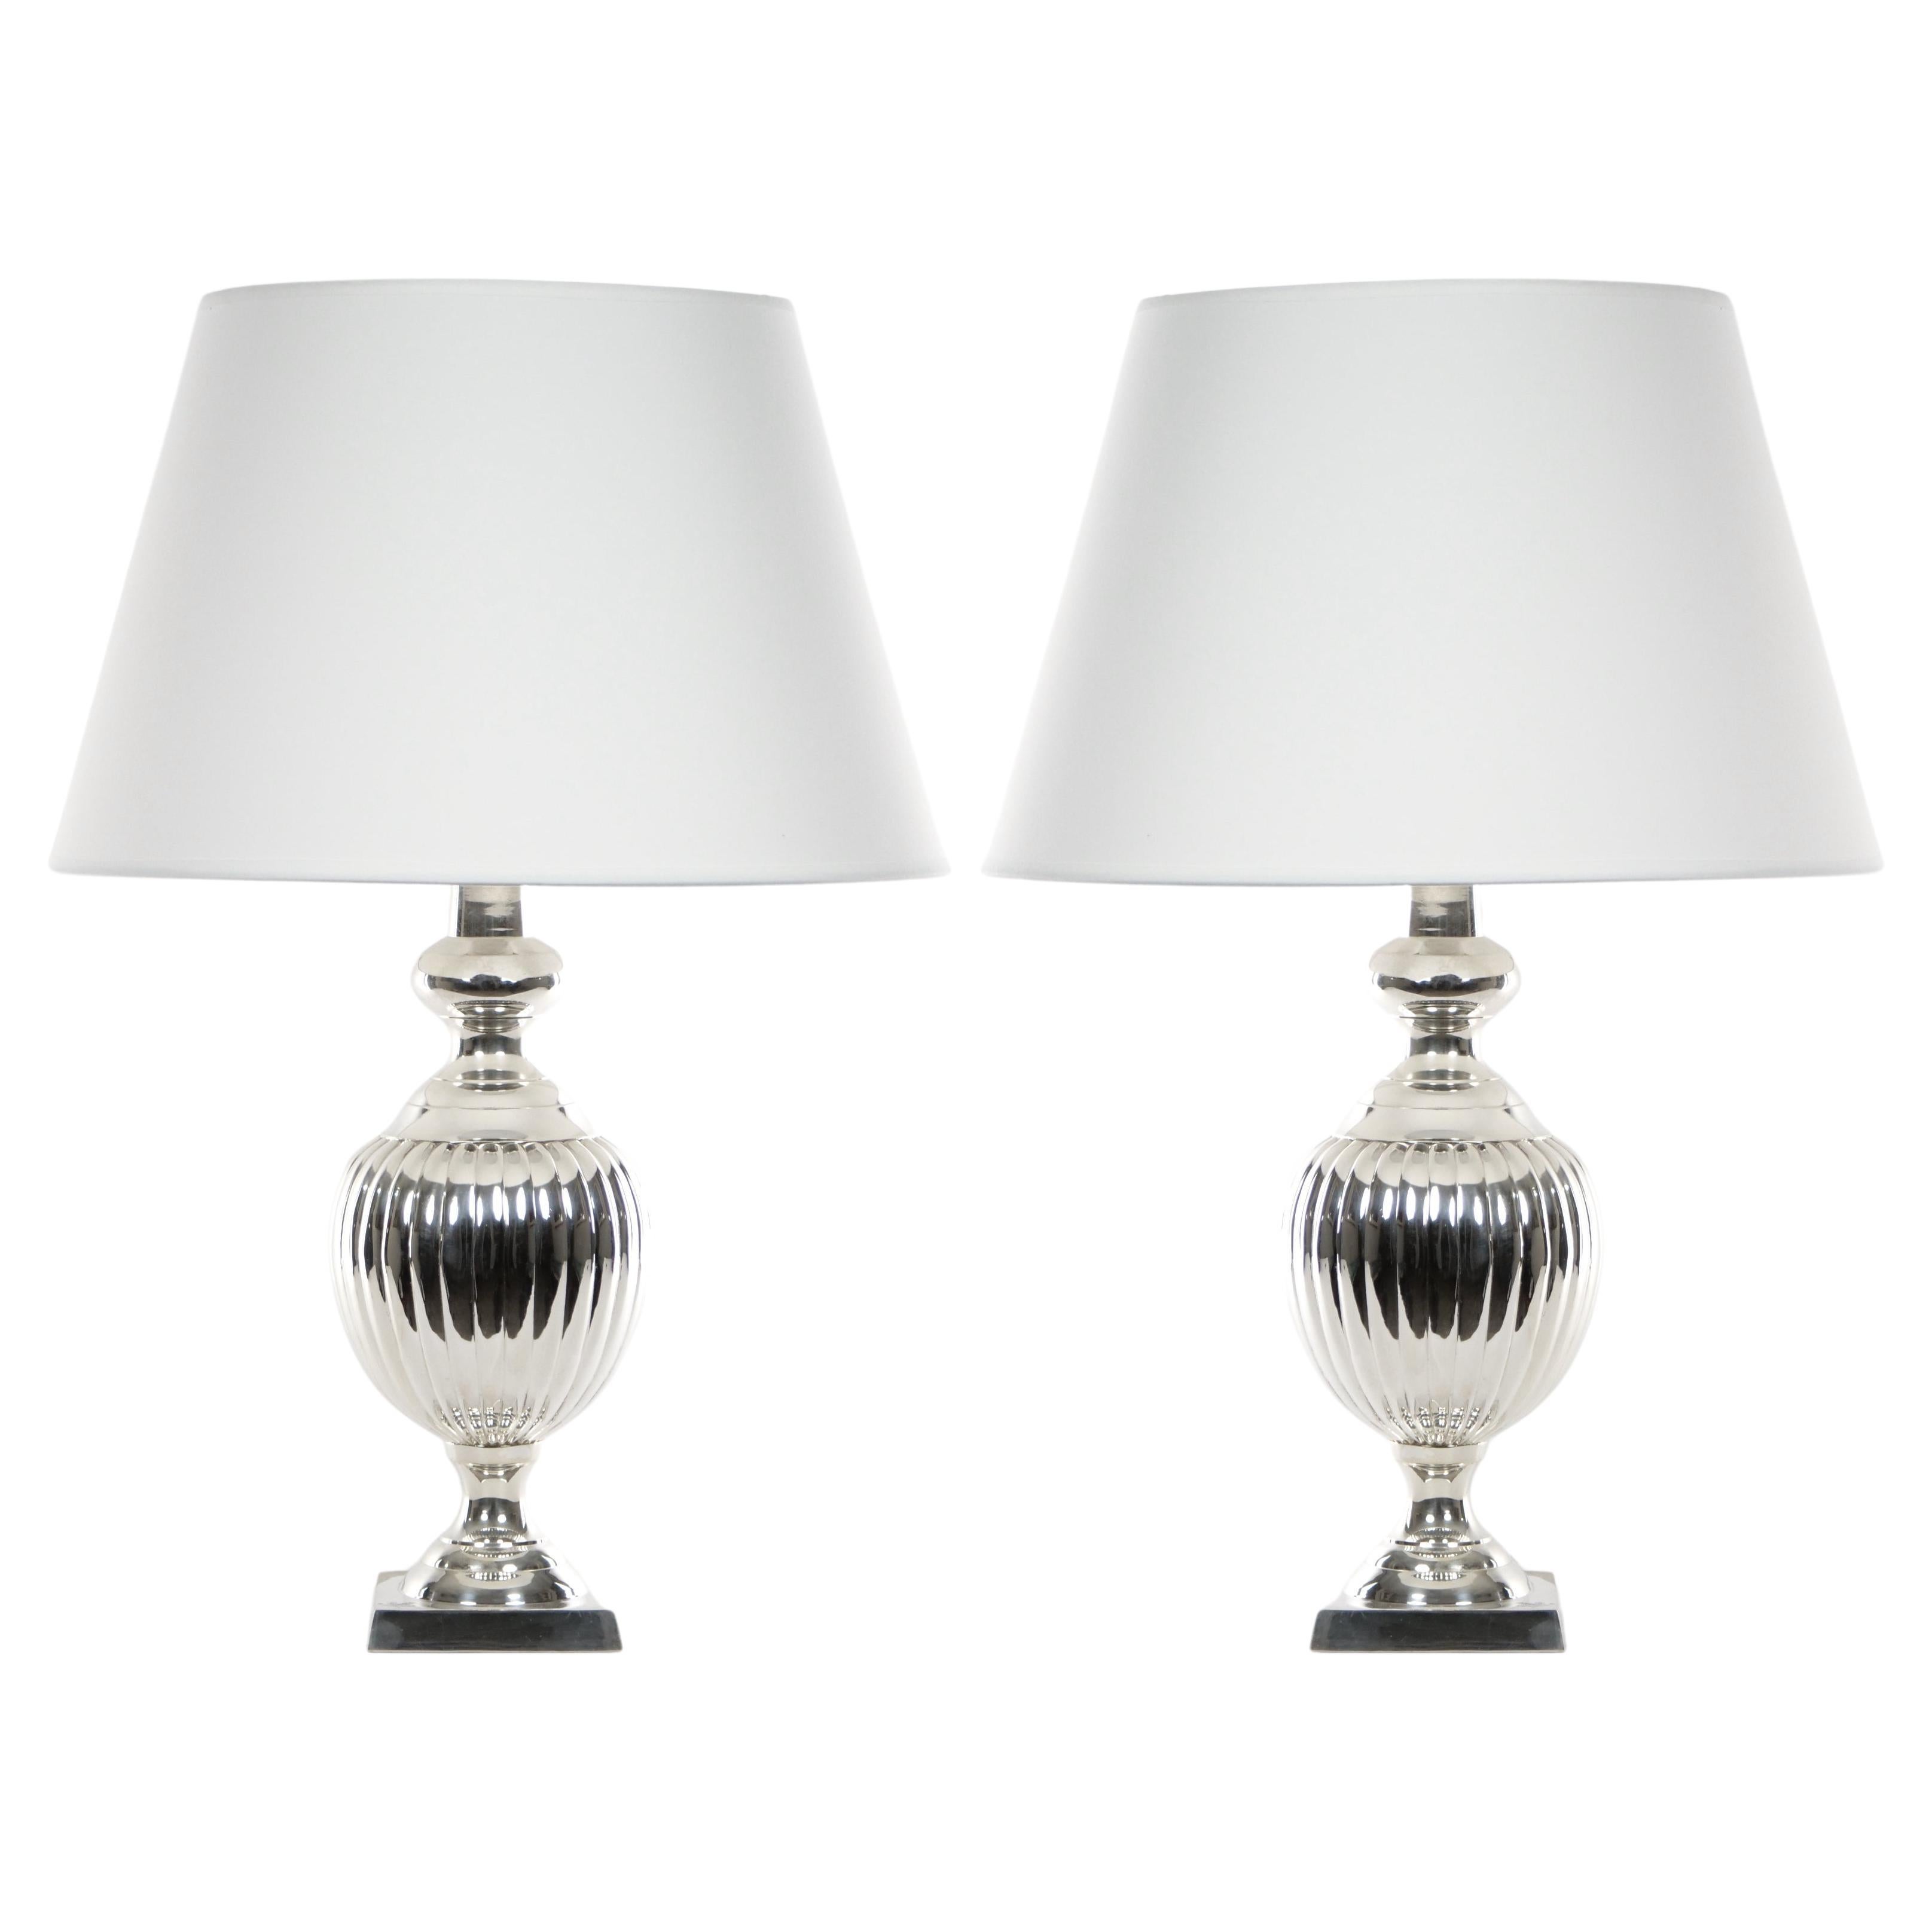 English Pair Mid-20th Century Silver Plate Table Lamp For Sale